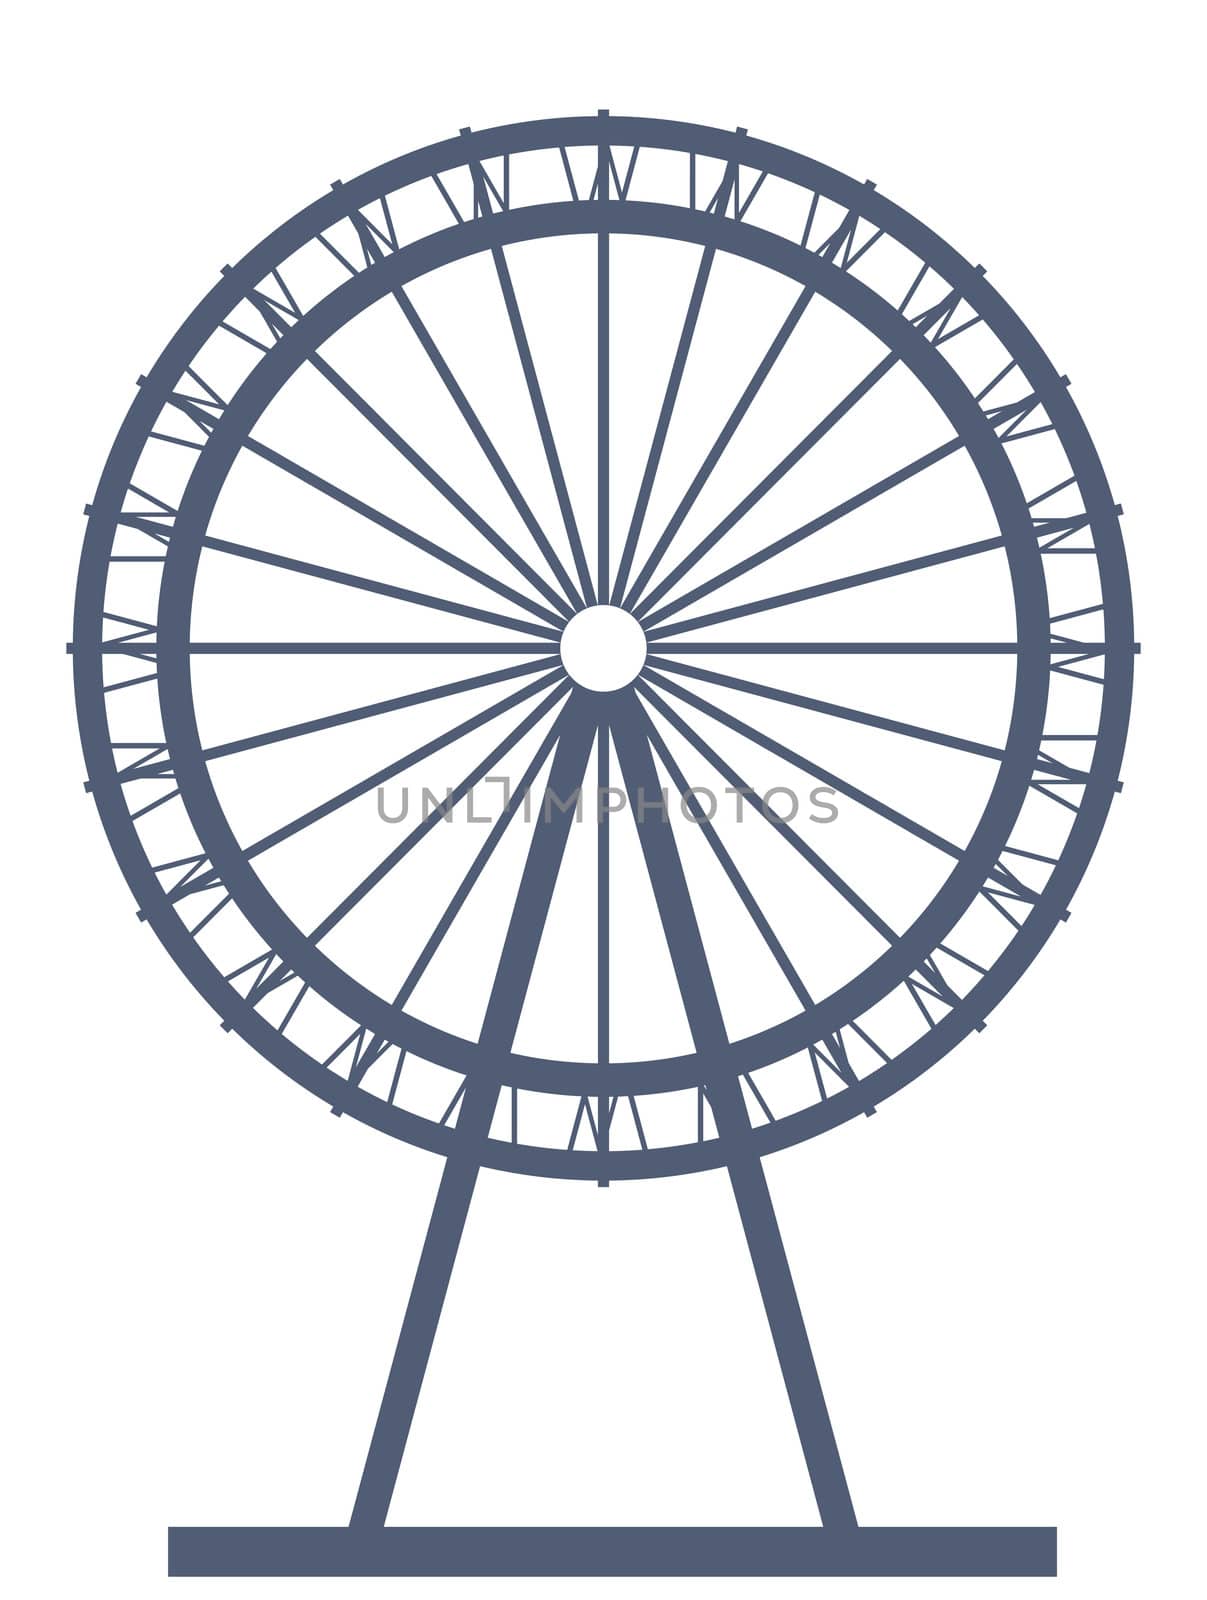 view of ferry wheel with white background
